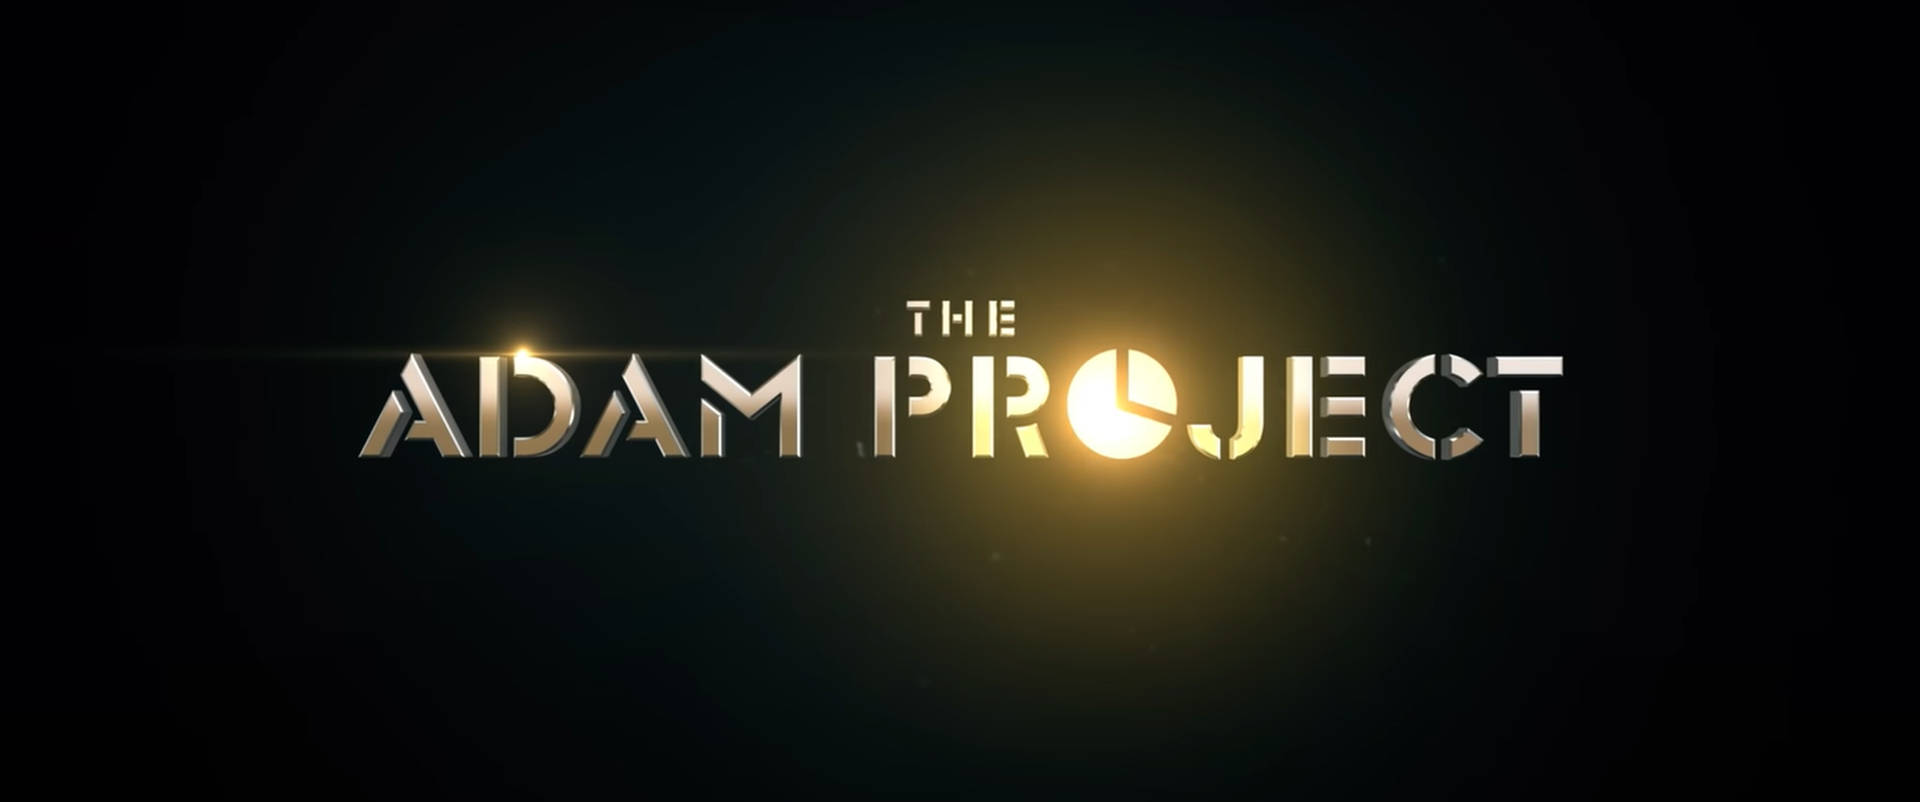 The Adam Project Movie Title Background